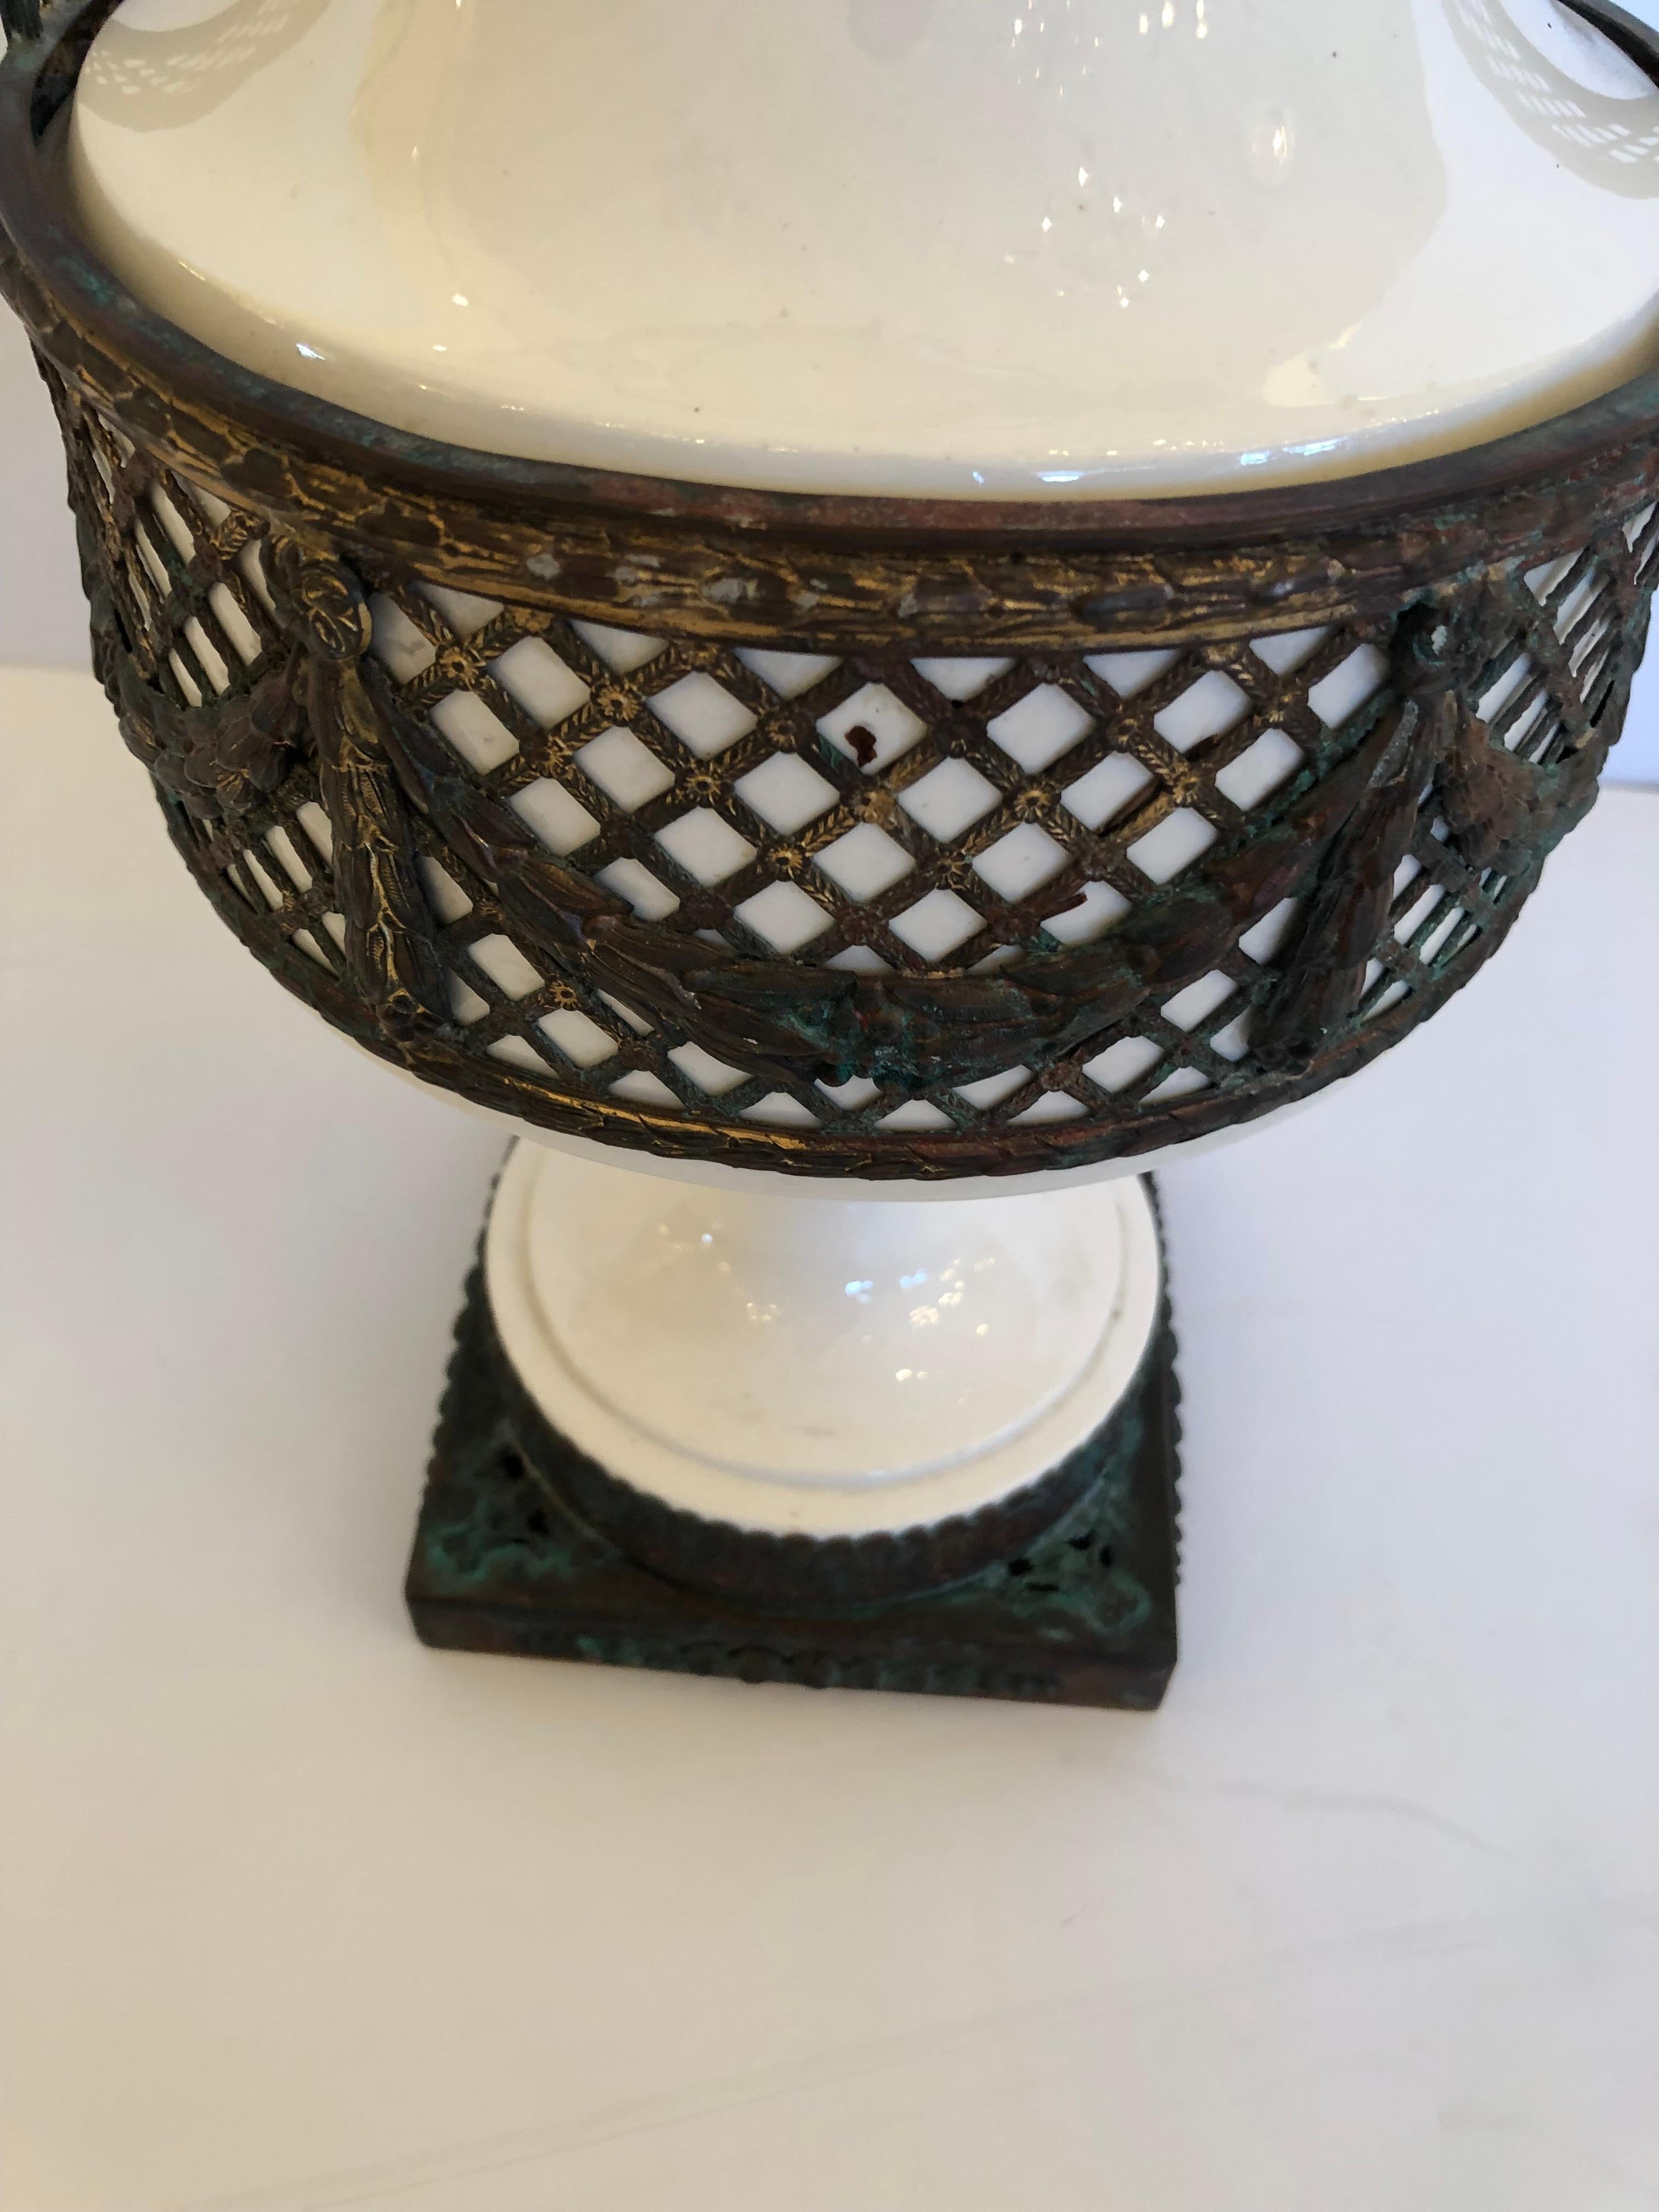 Neoclassical Romantic Antique French White Porcelain Vase with Aged Copper Overlay For Sale